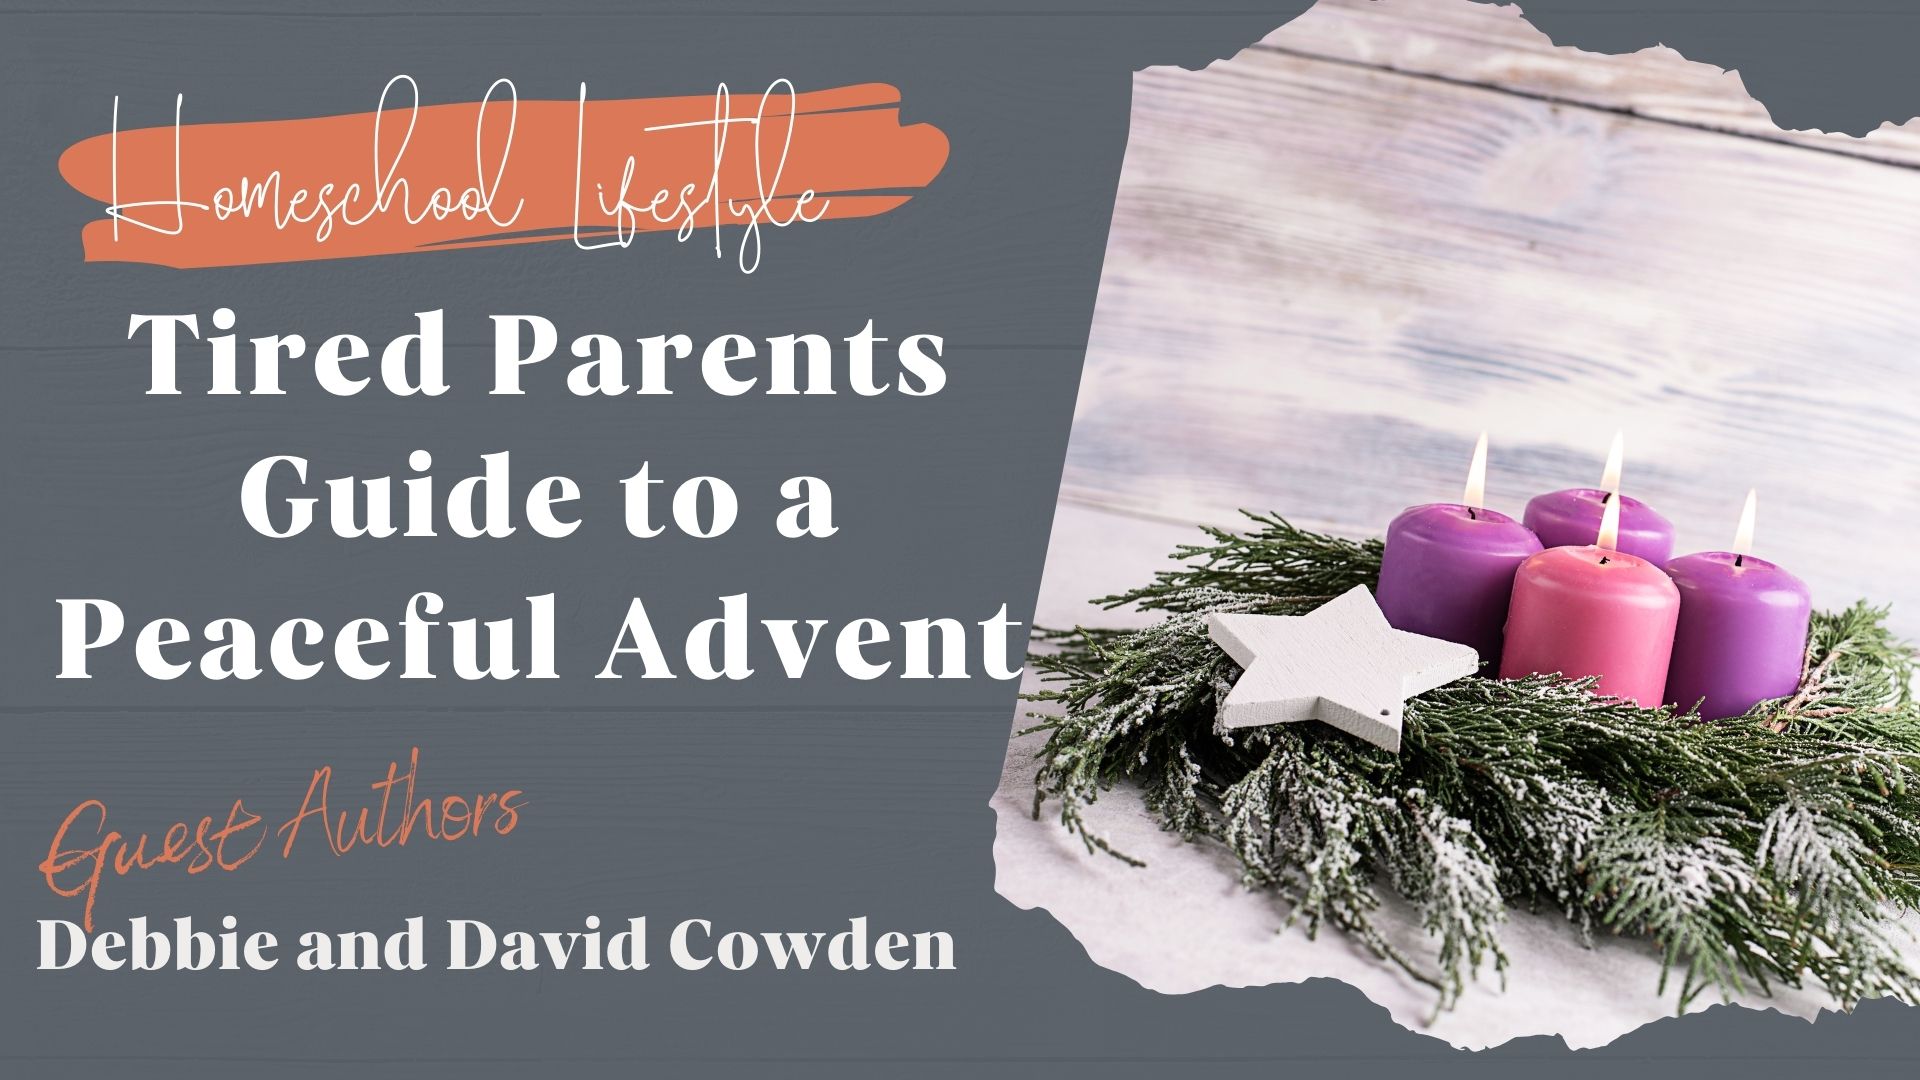 Tired Parents Guide to a Peaceful Advent